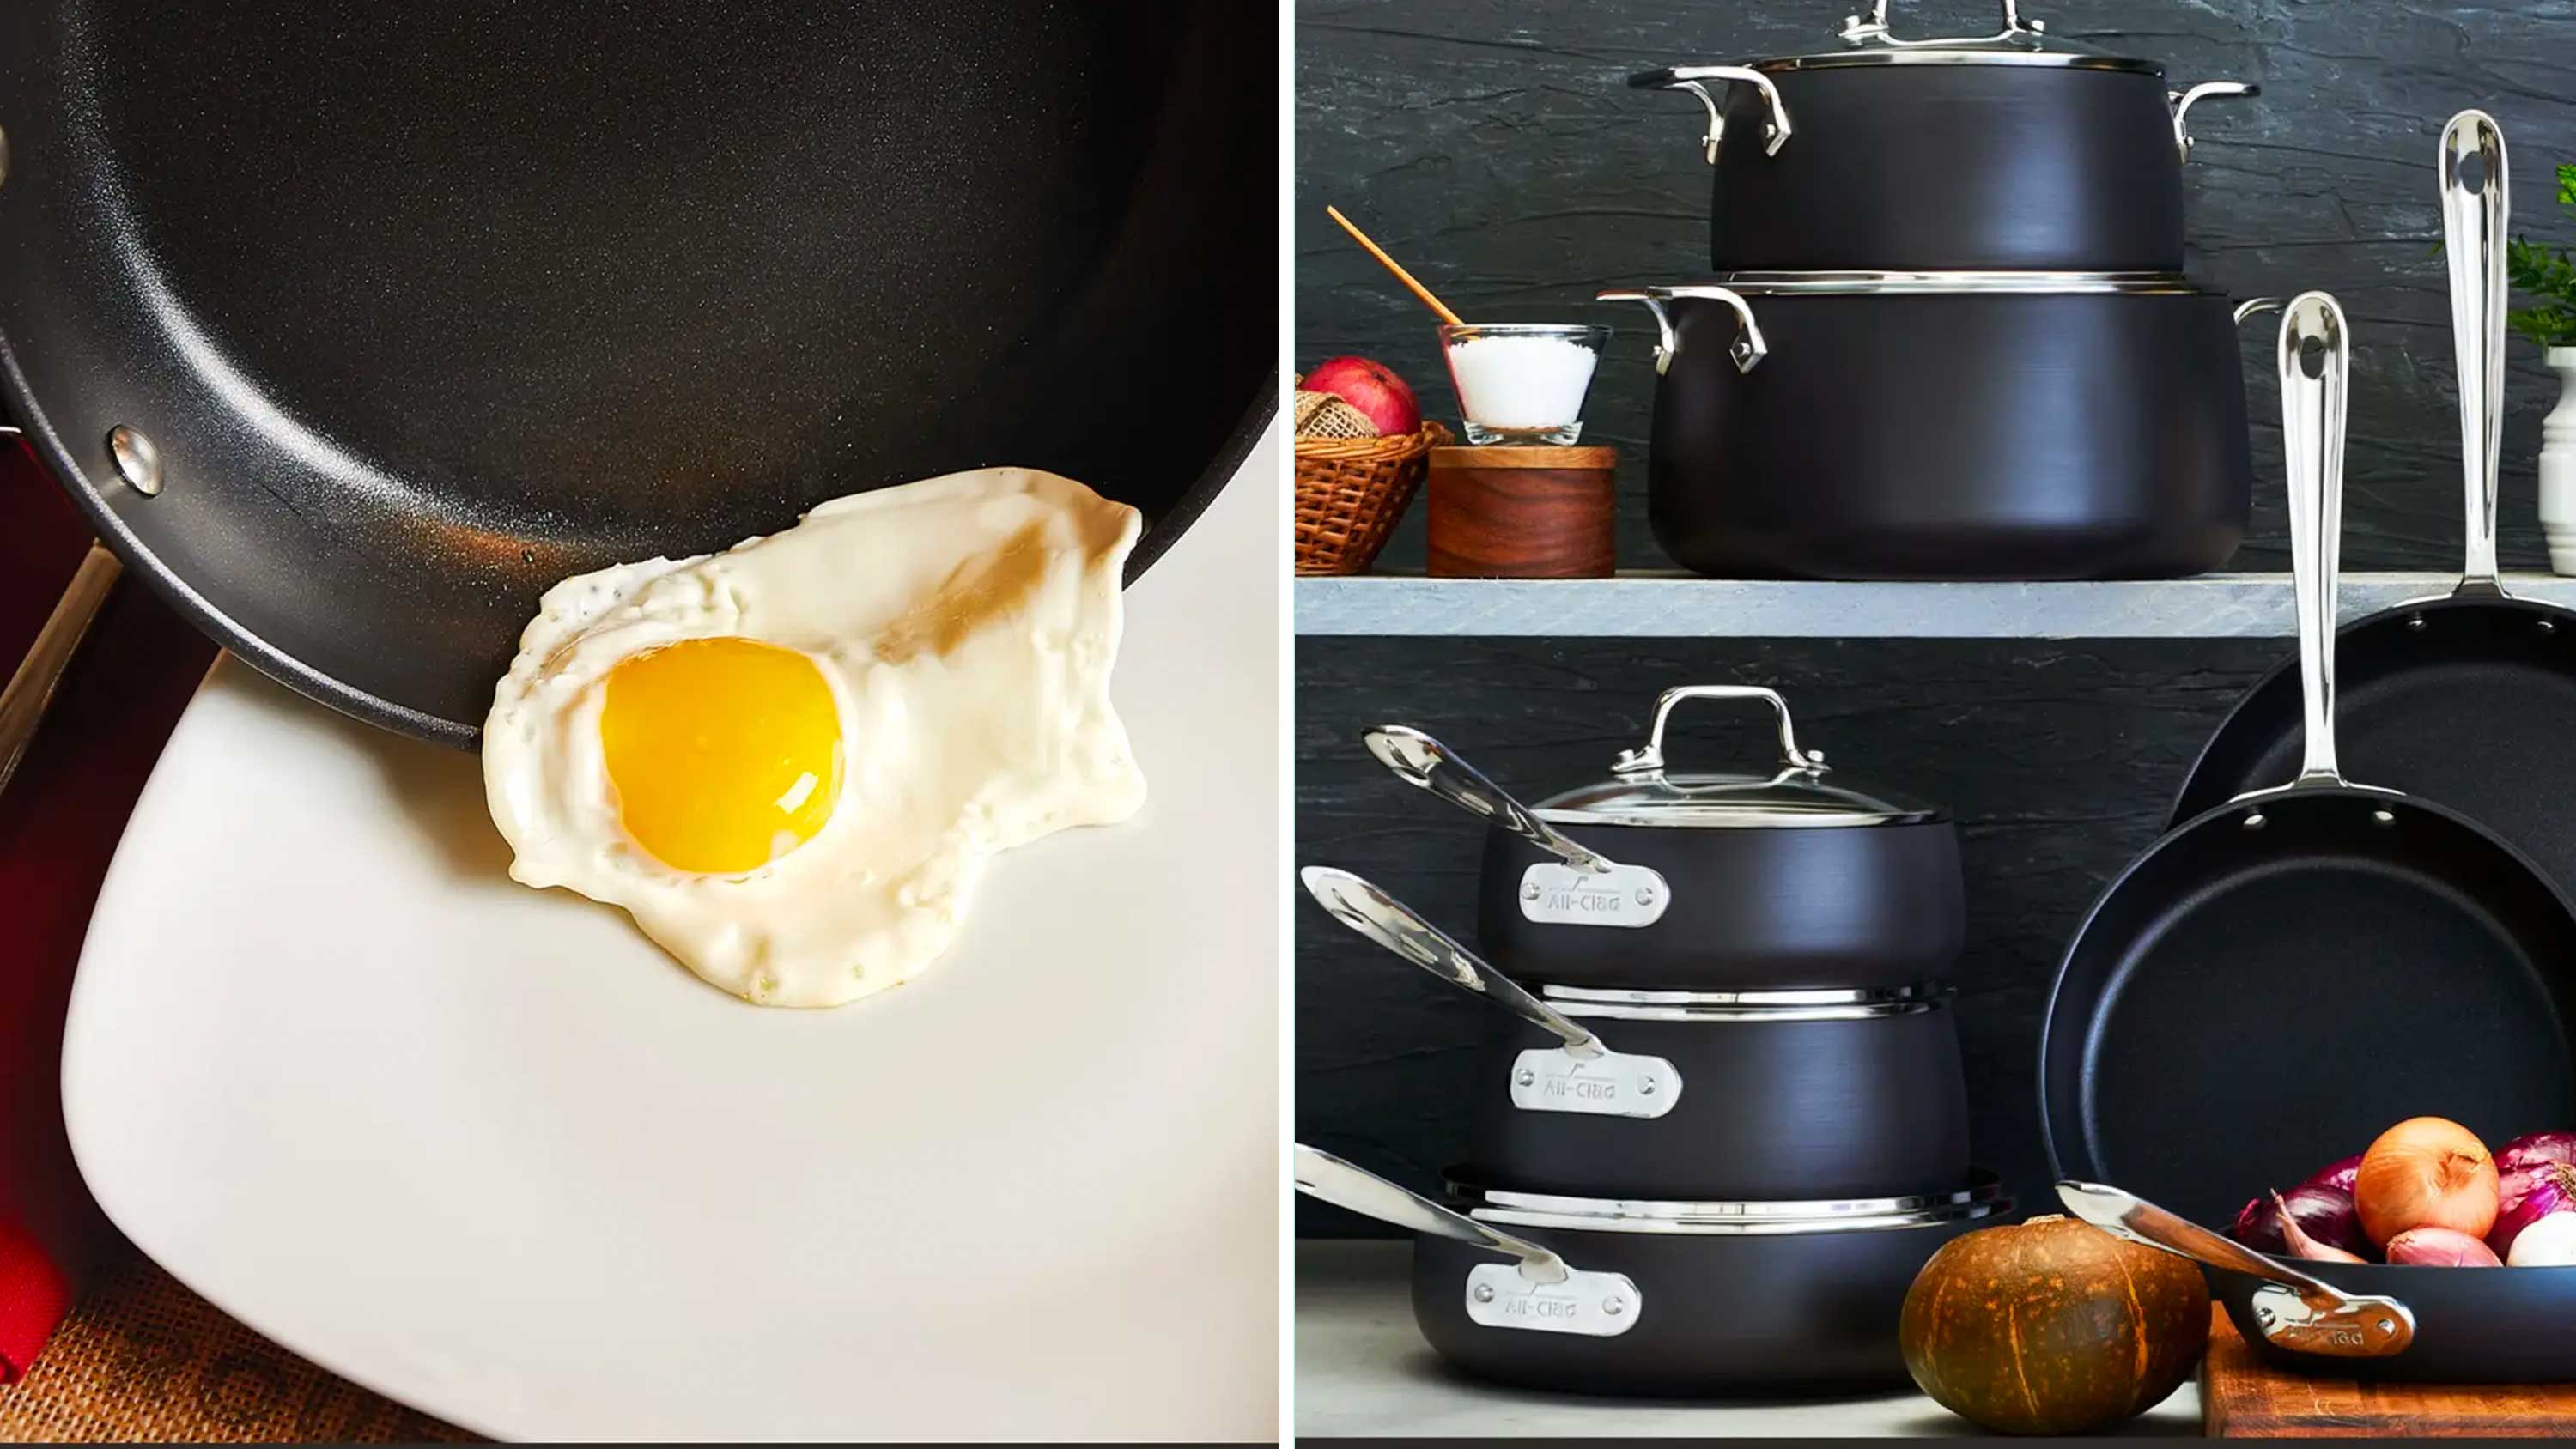 All-Clad cookware sale: Save up to 74% on All-Clad pots and pans